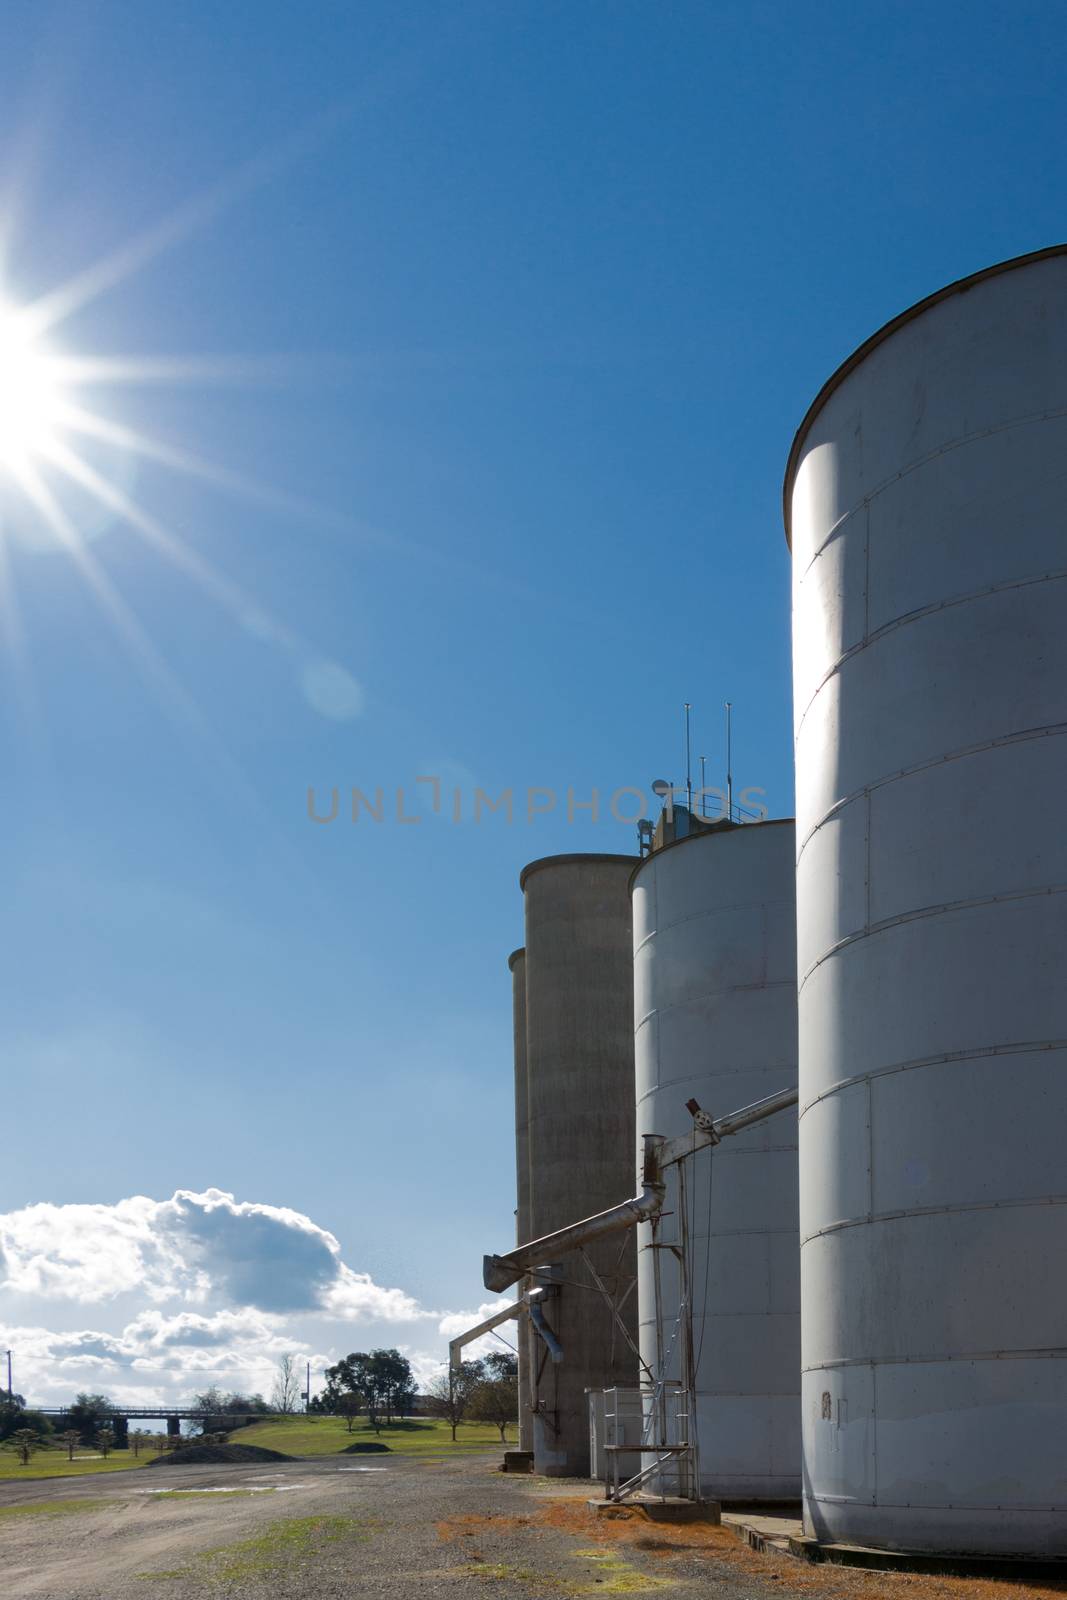 Silos on Blue Sky by davidhewison